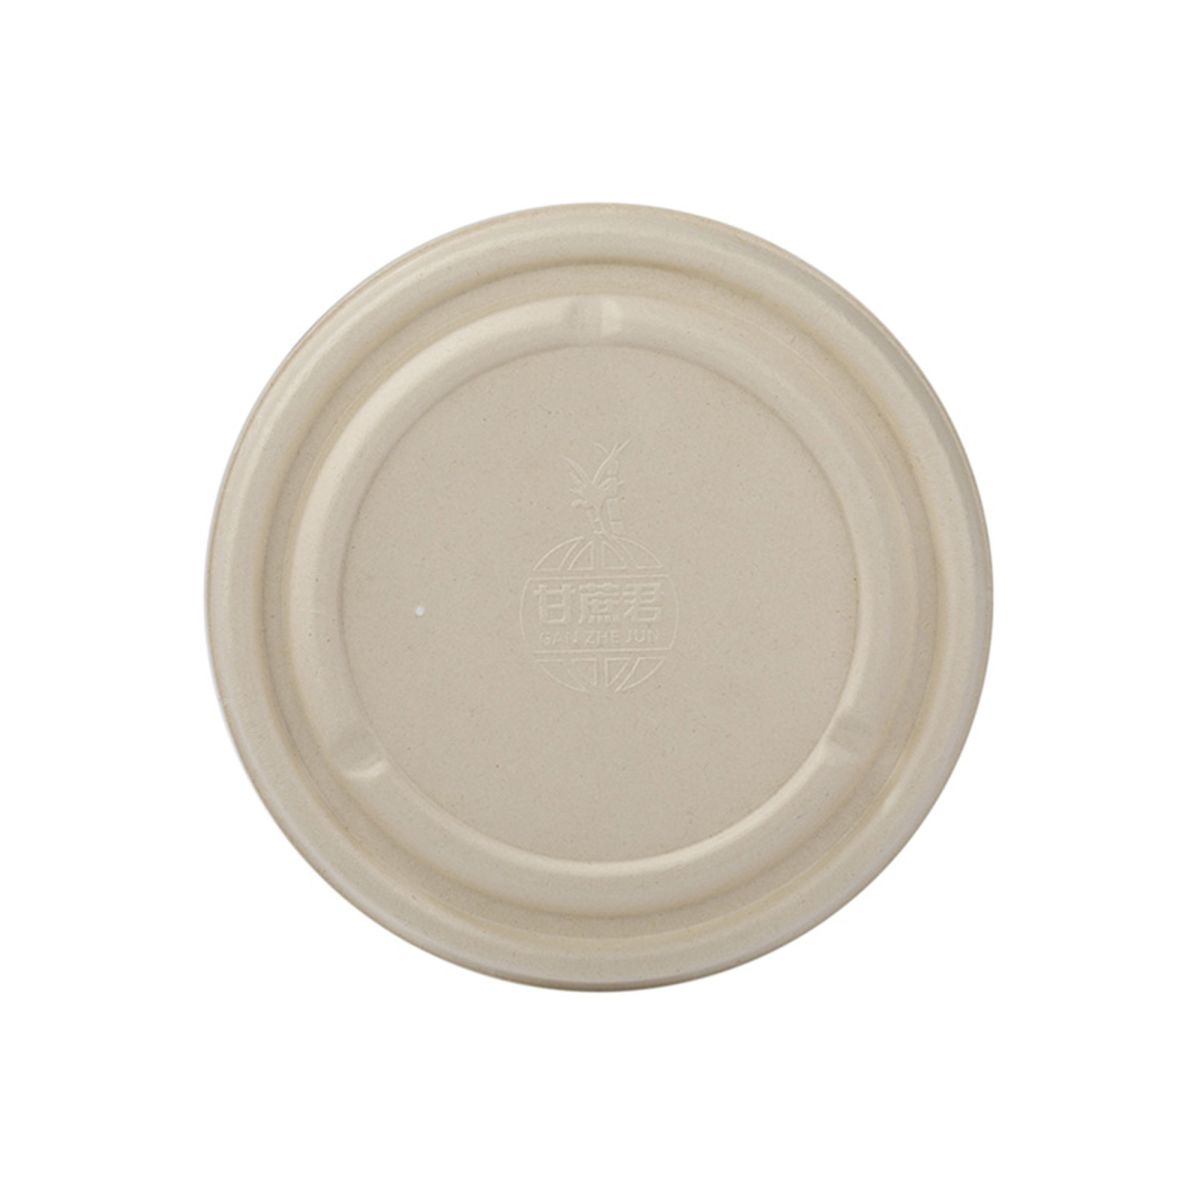 Lid for Round Sugarcane Bowls